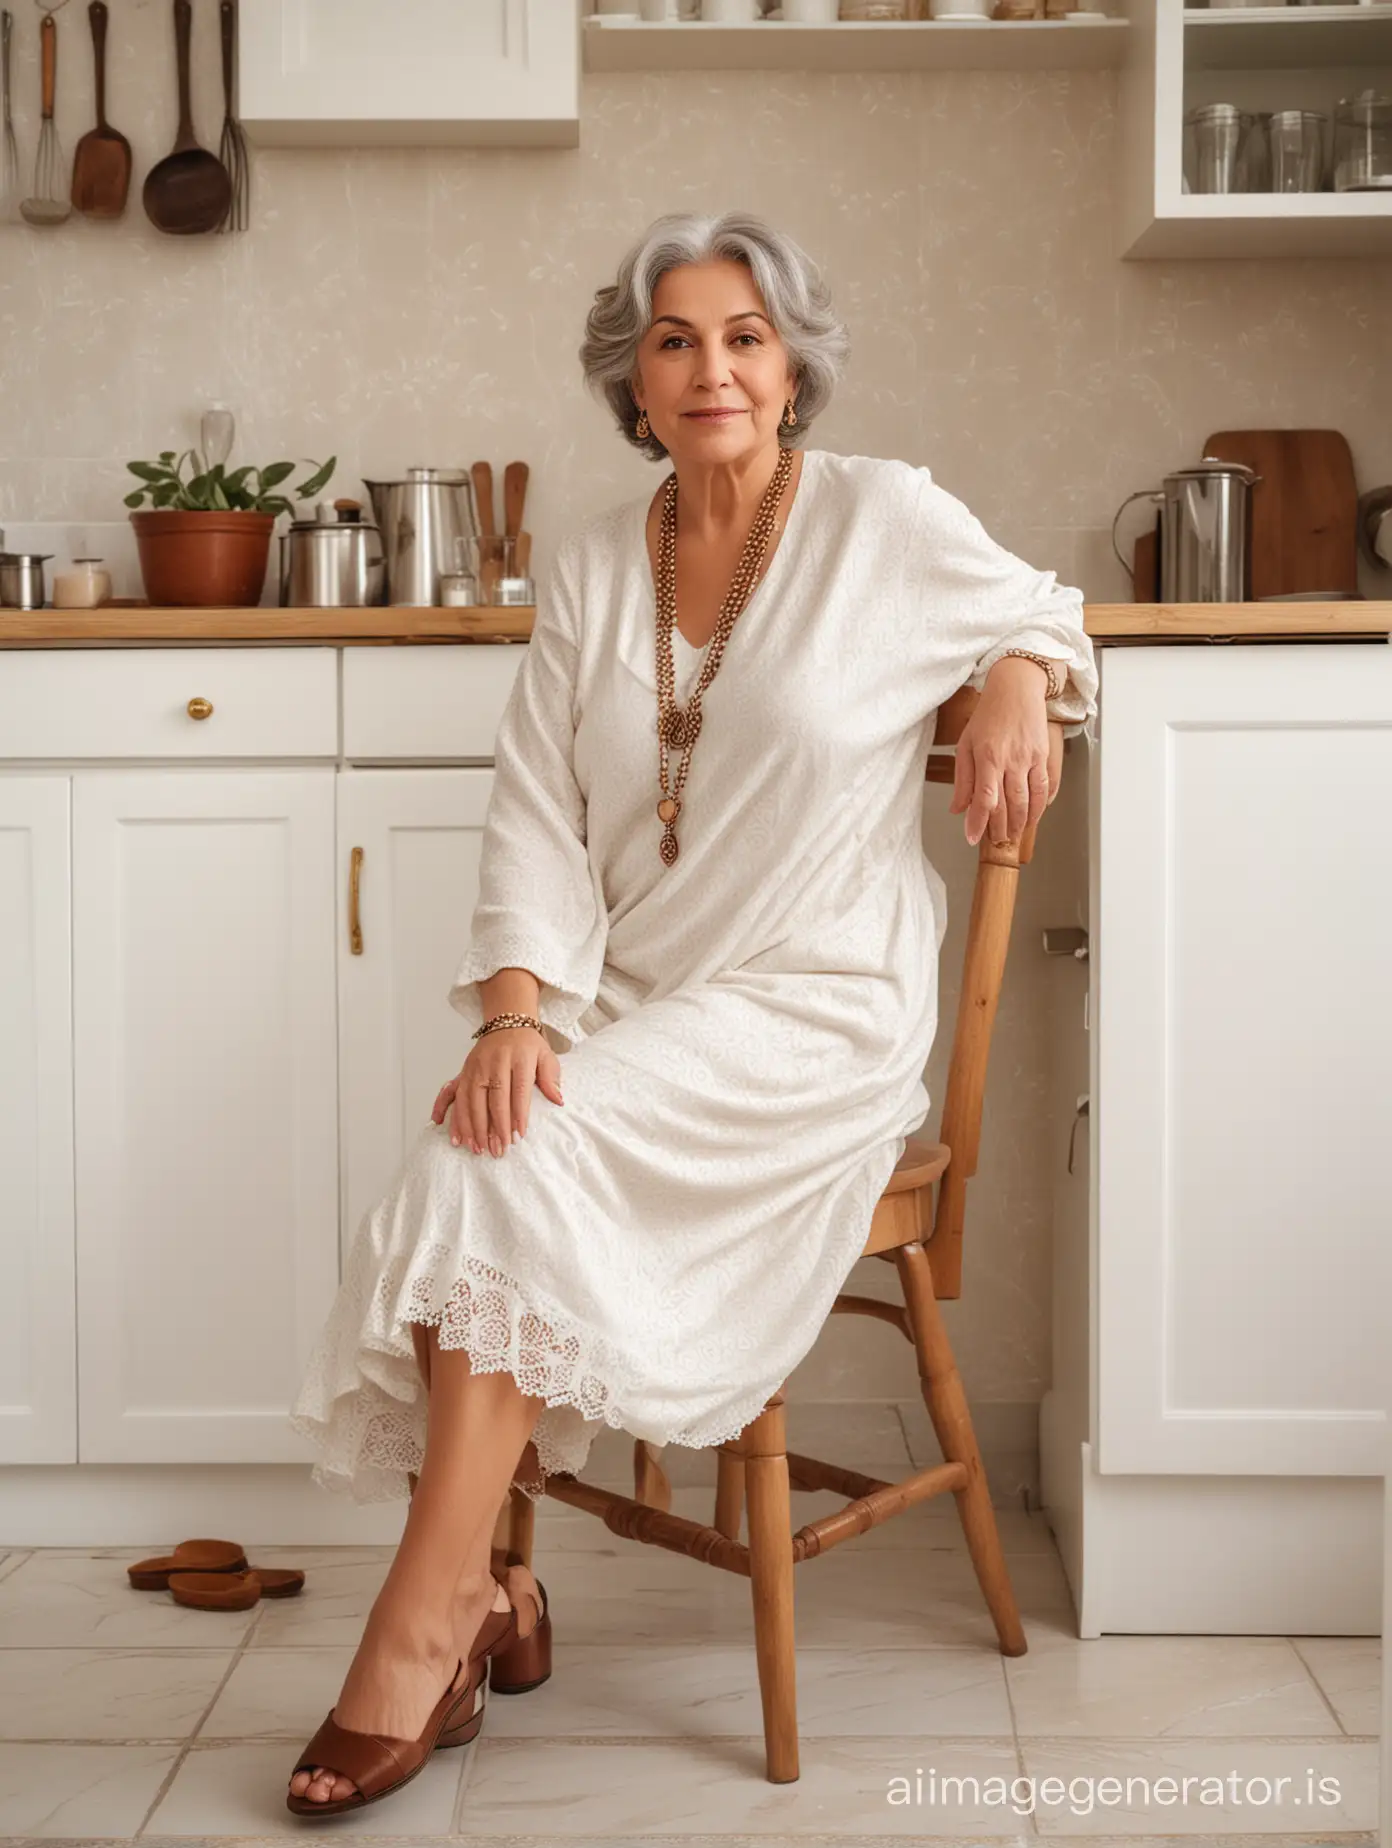 iranian  fat woman 70 years old, white wide cozy dress with beige pattern, brown shoes, brown necklace, white hair, sitting on a chair, in a cozy vintage white kitchen ,full body shot, morning light